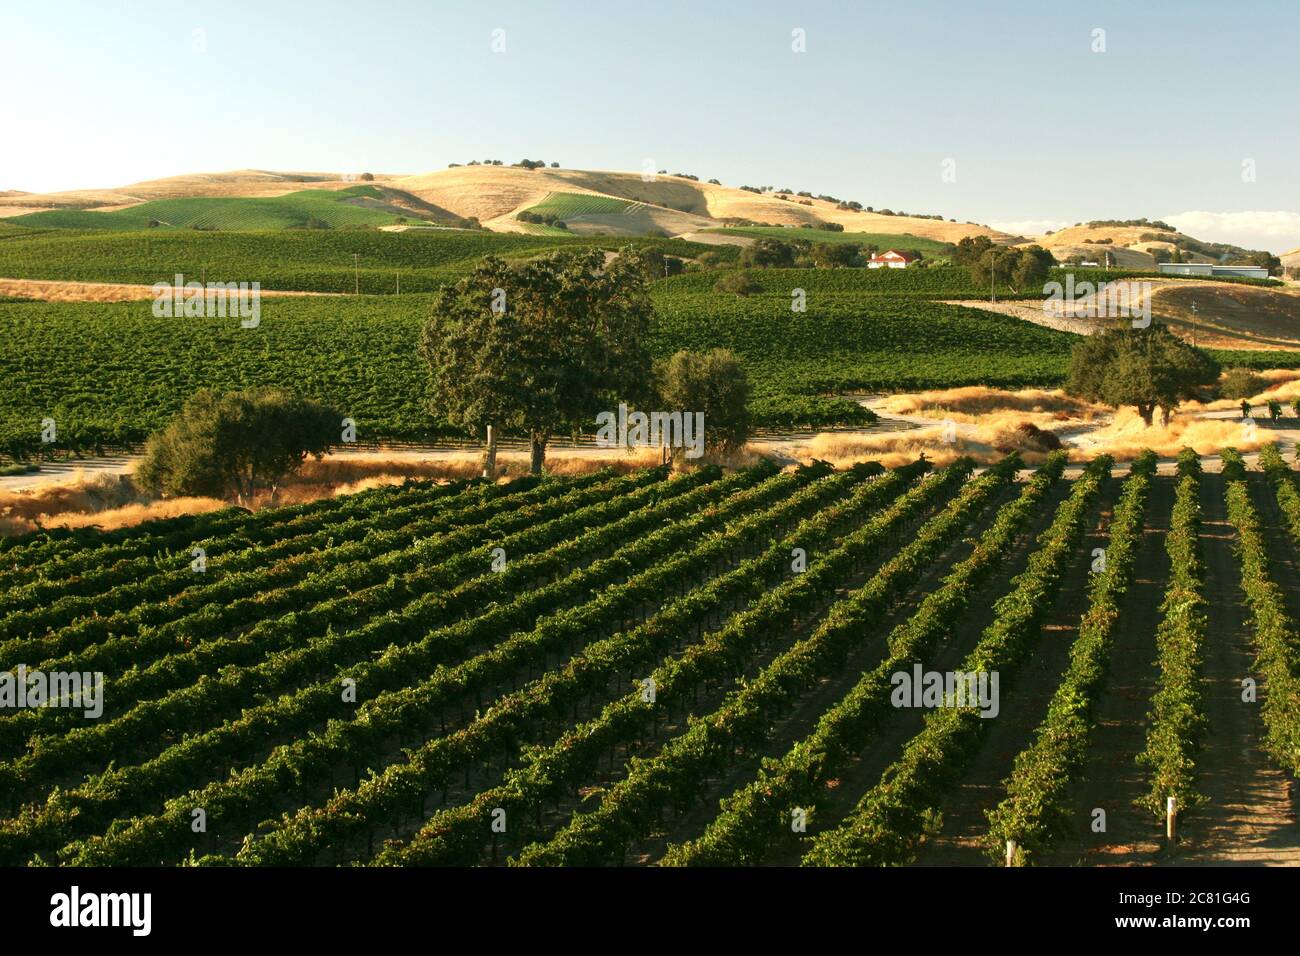 Coastal oaks standing among the rows of wine grapes in a Paso Robles vineyard Stock Photo